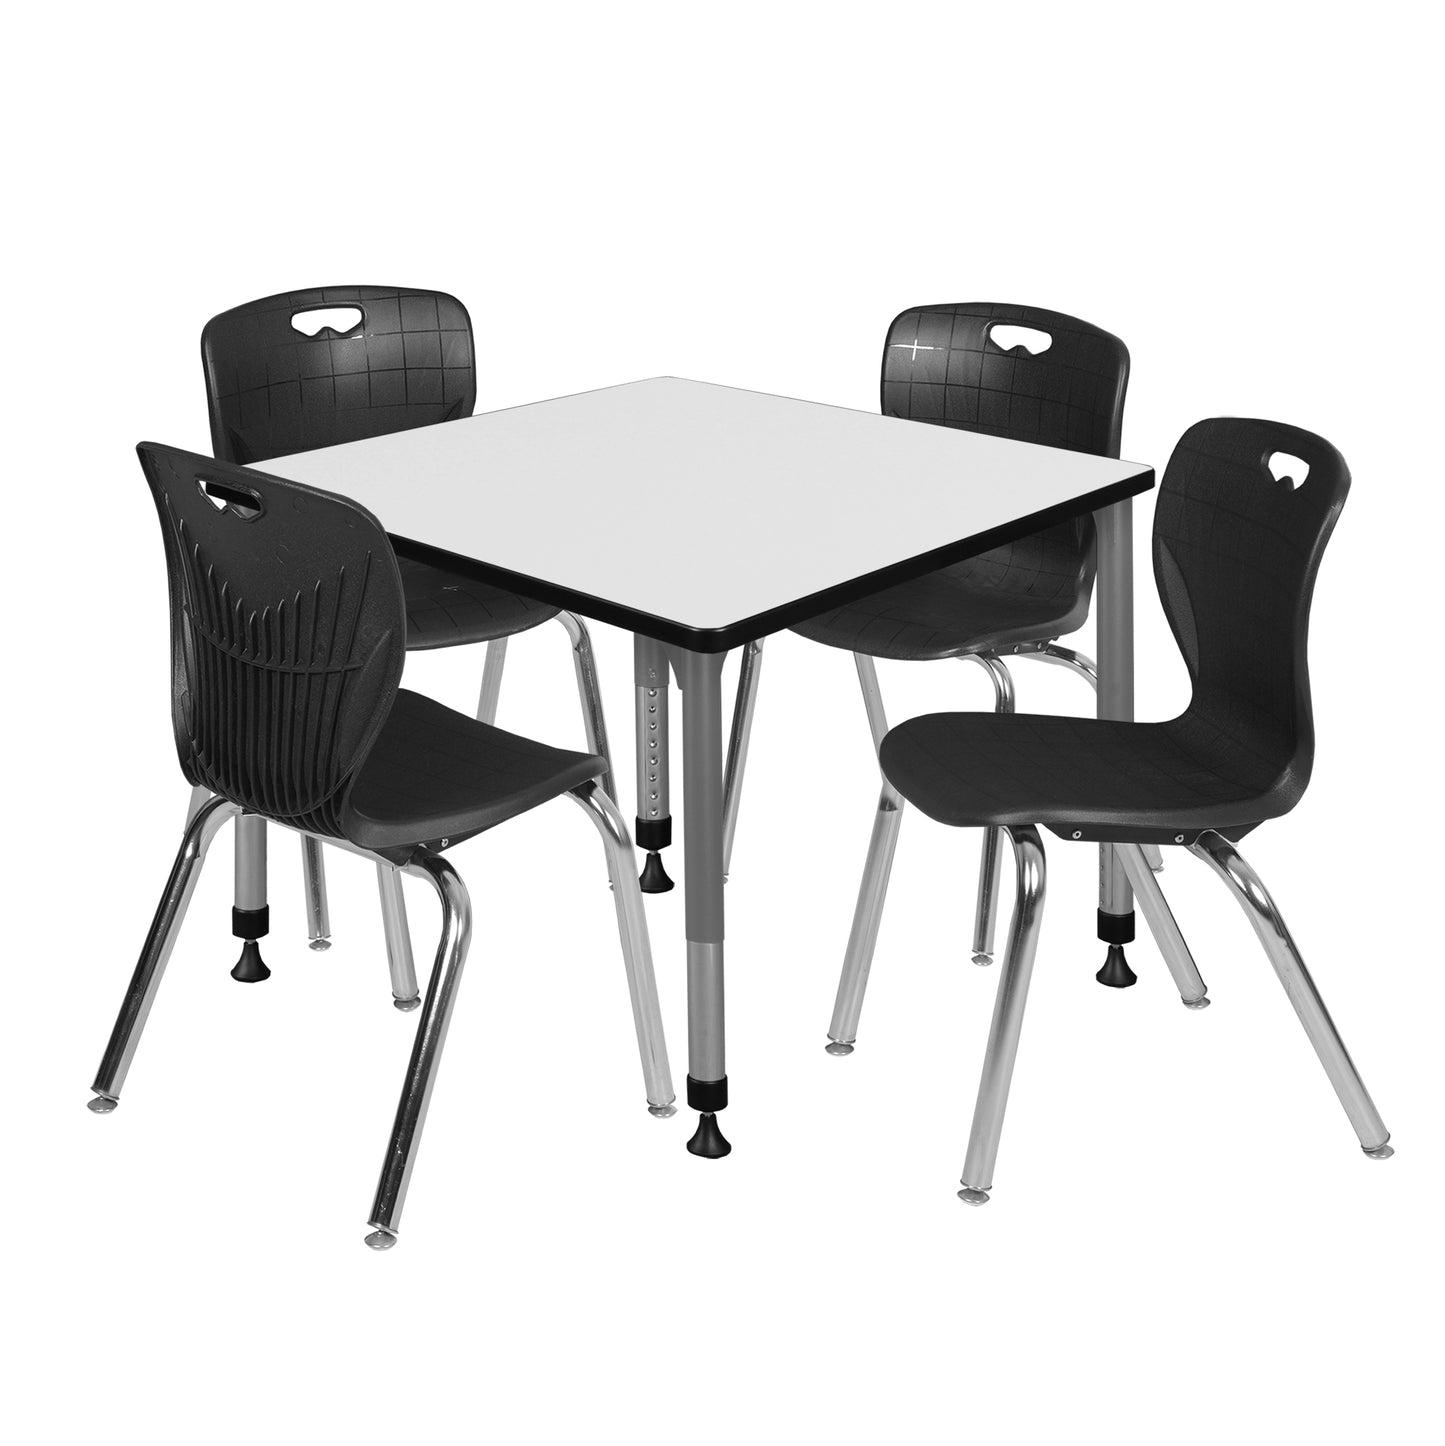 Regency Kee 36 in. Square Adjustable Classroom Table & 4 Andy 18 in. Stack Chairs